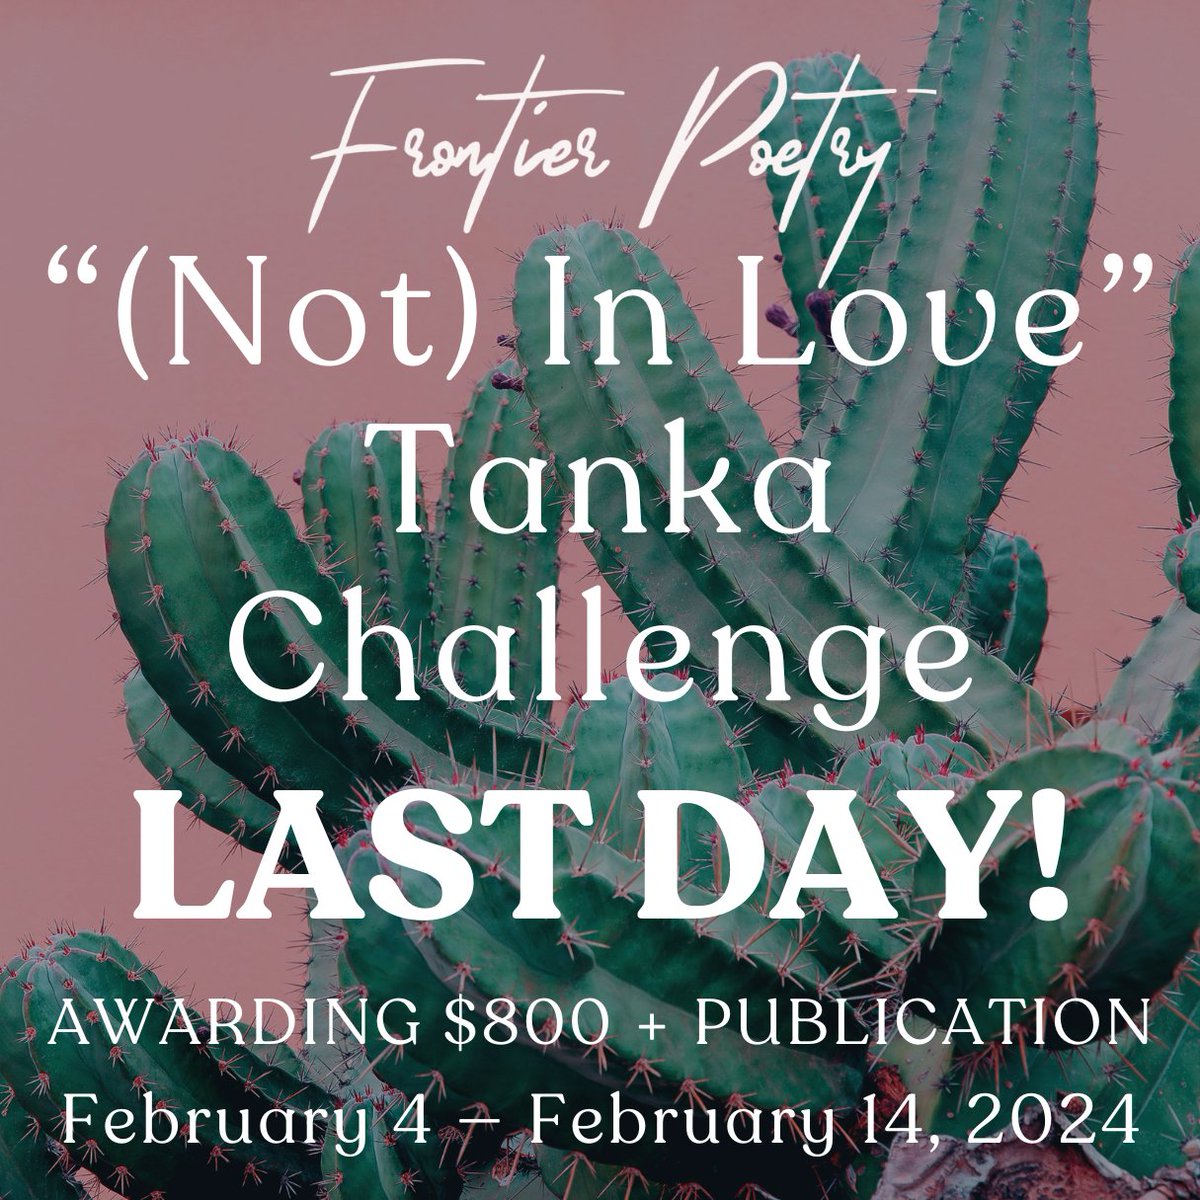 Final day to send us your tankas! What do you do when you are (not) in love? Send us your poems in the form of a tanka. The first-place winner will receive $500 + publication. Deadline: February 14, 2024, 11:59 PM Pacific Learn more: frontierpoetry.com/poetry-awards/